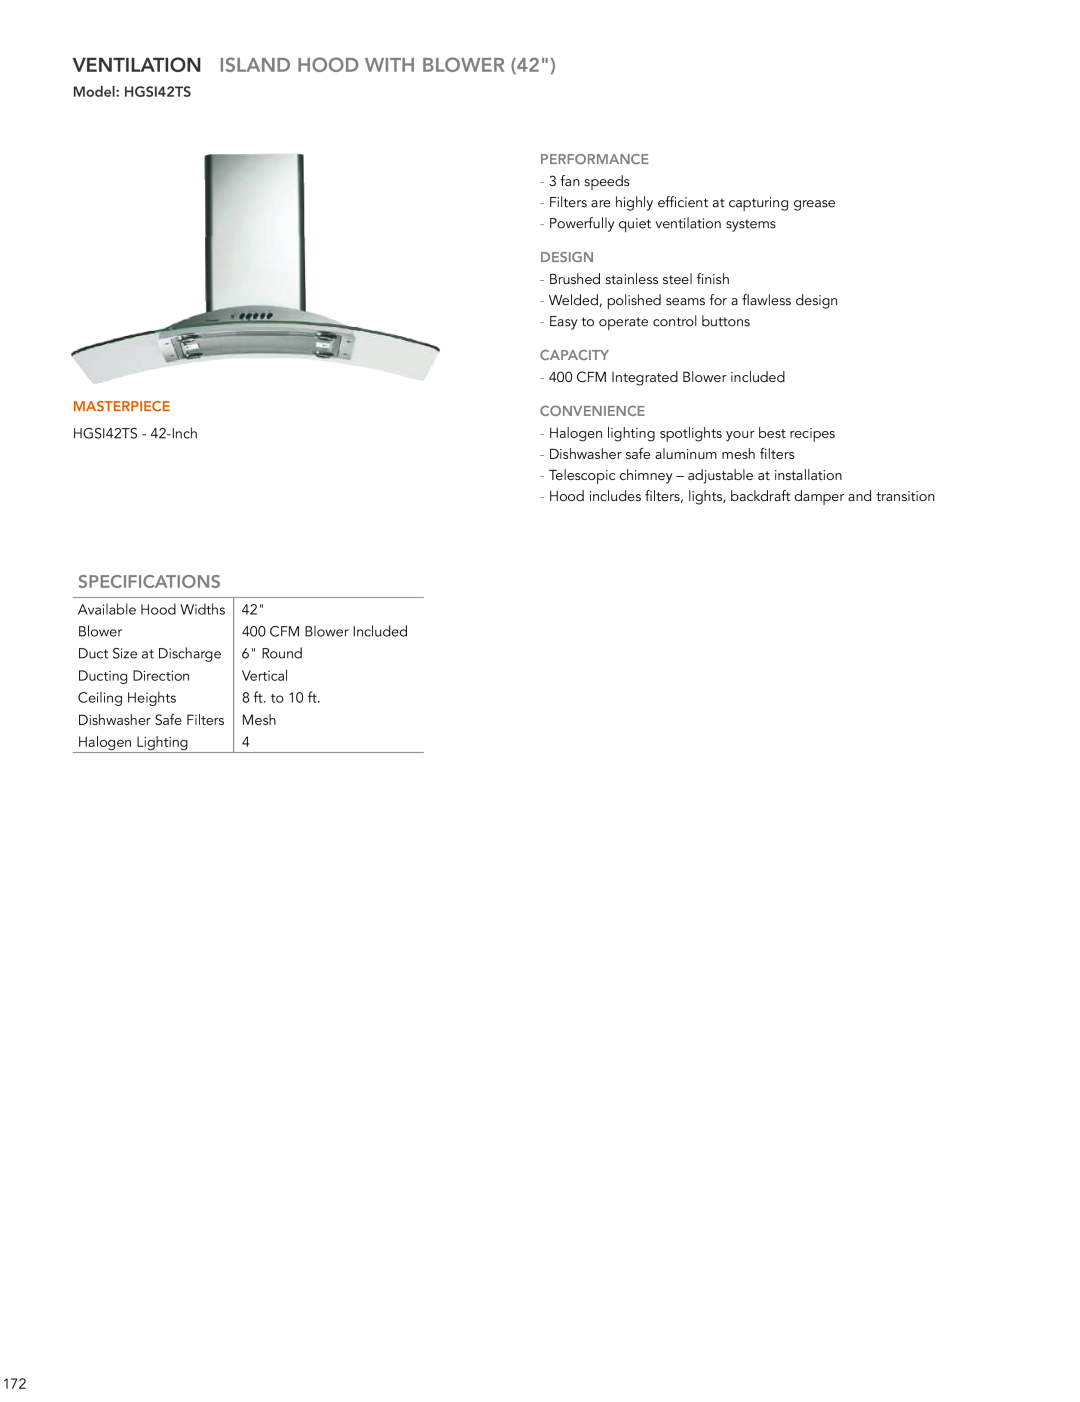 Thermador HMWB36FS Ventilation Island Hood With Blower, Model HgSI42TS, fan speeds, Powerfully quiet ventilation systems 